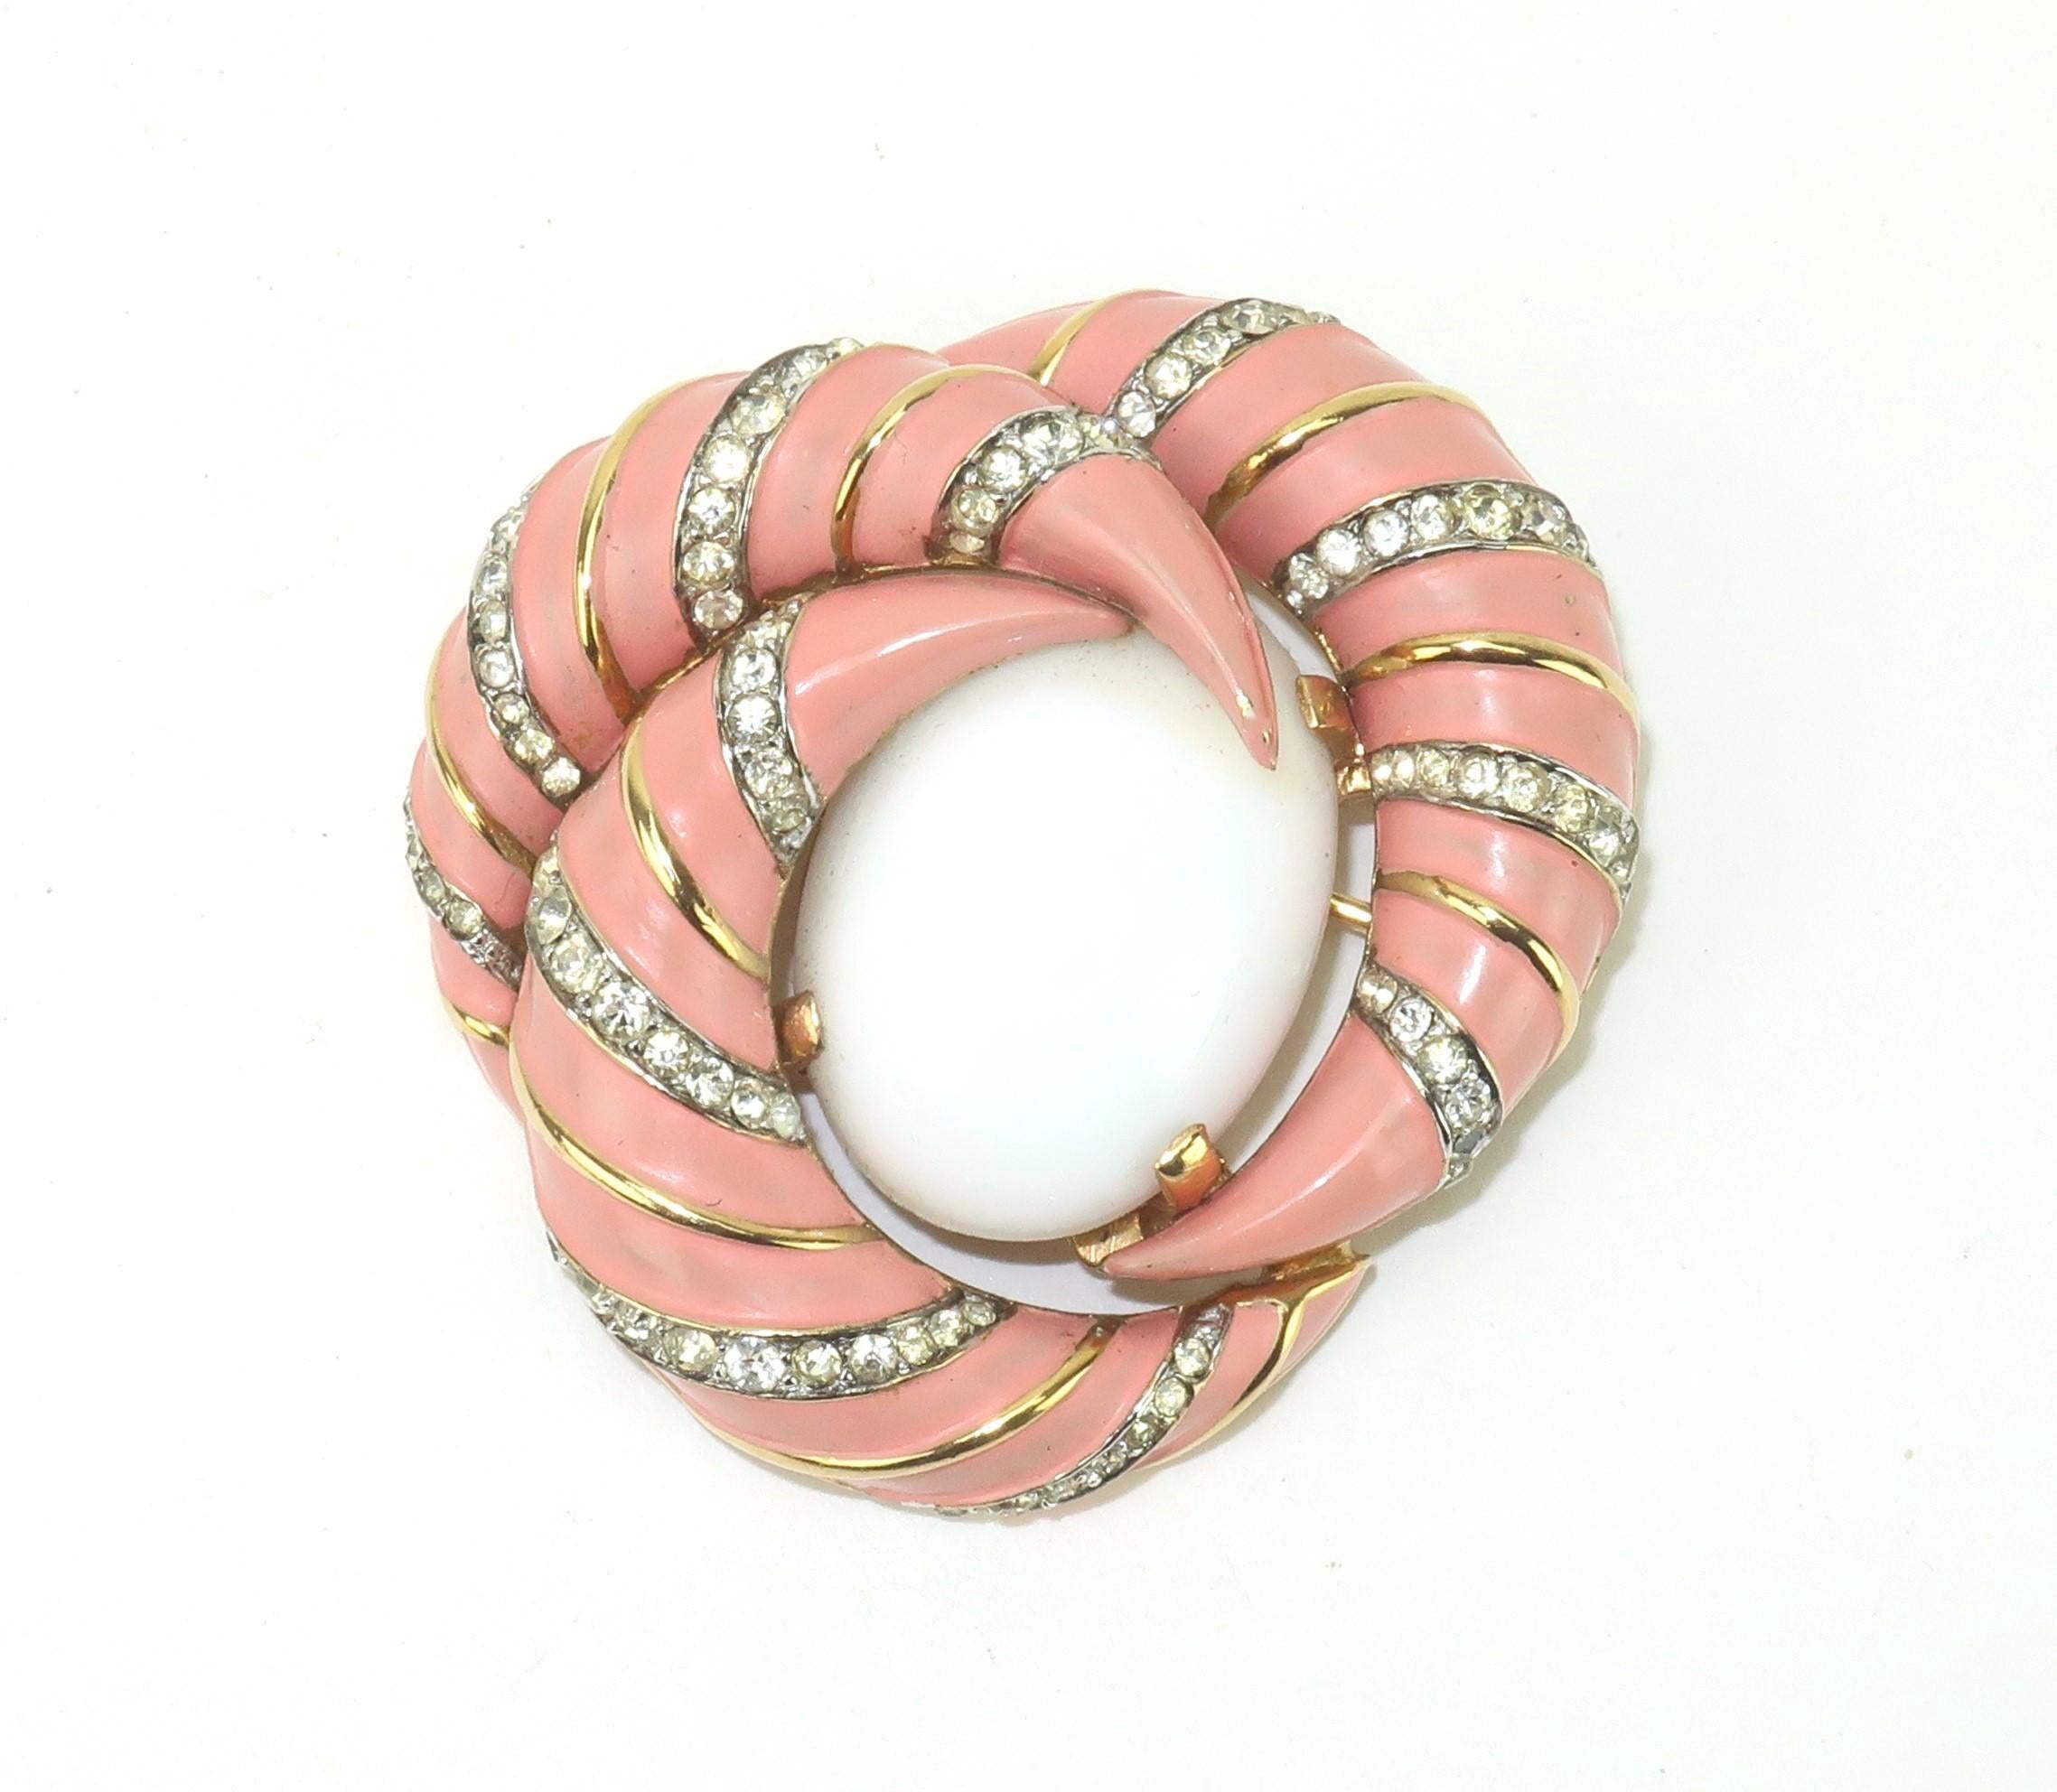 Jomaz put the fabulous in faux with their lovely costume jewelry creations that mirror the quality and style of fine jewelry.  This striking brooch combines a milk glass cabochon center stone surrounded by a crescent shaped coral pink enameled gold